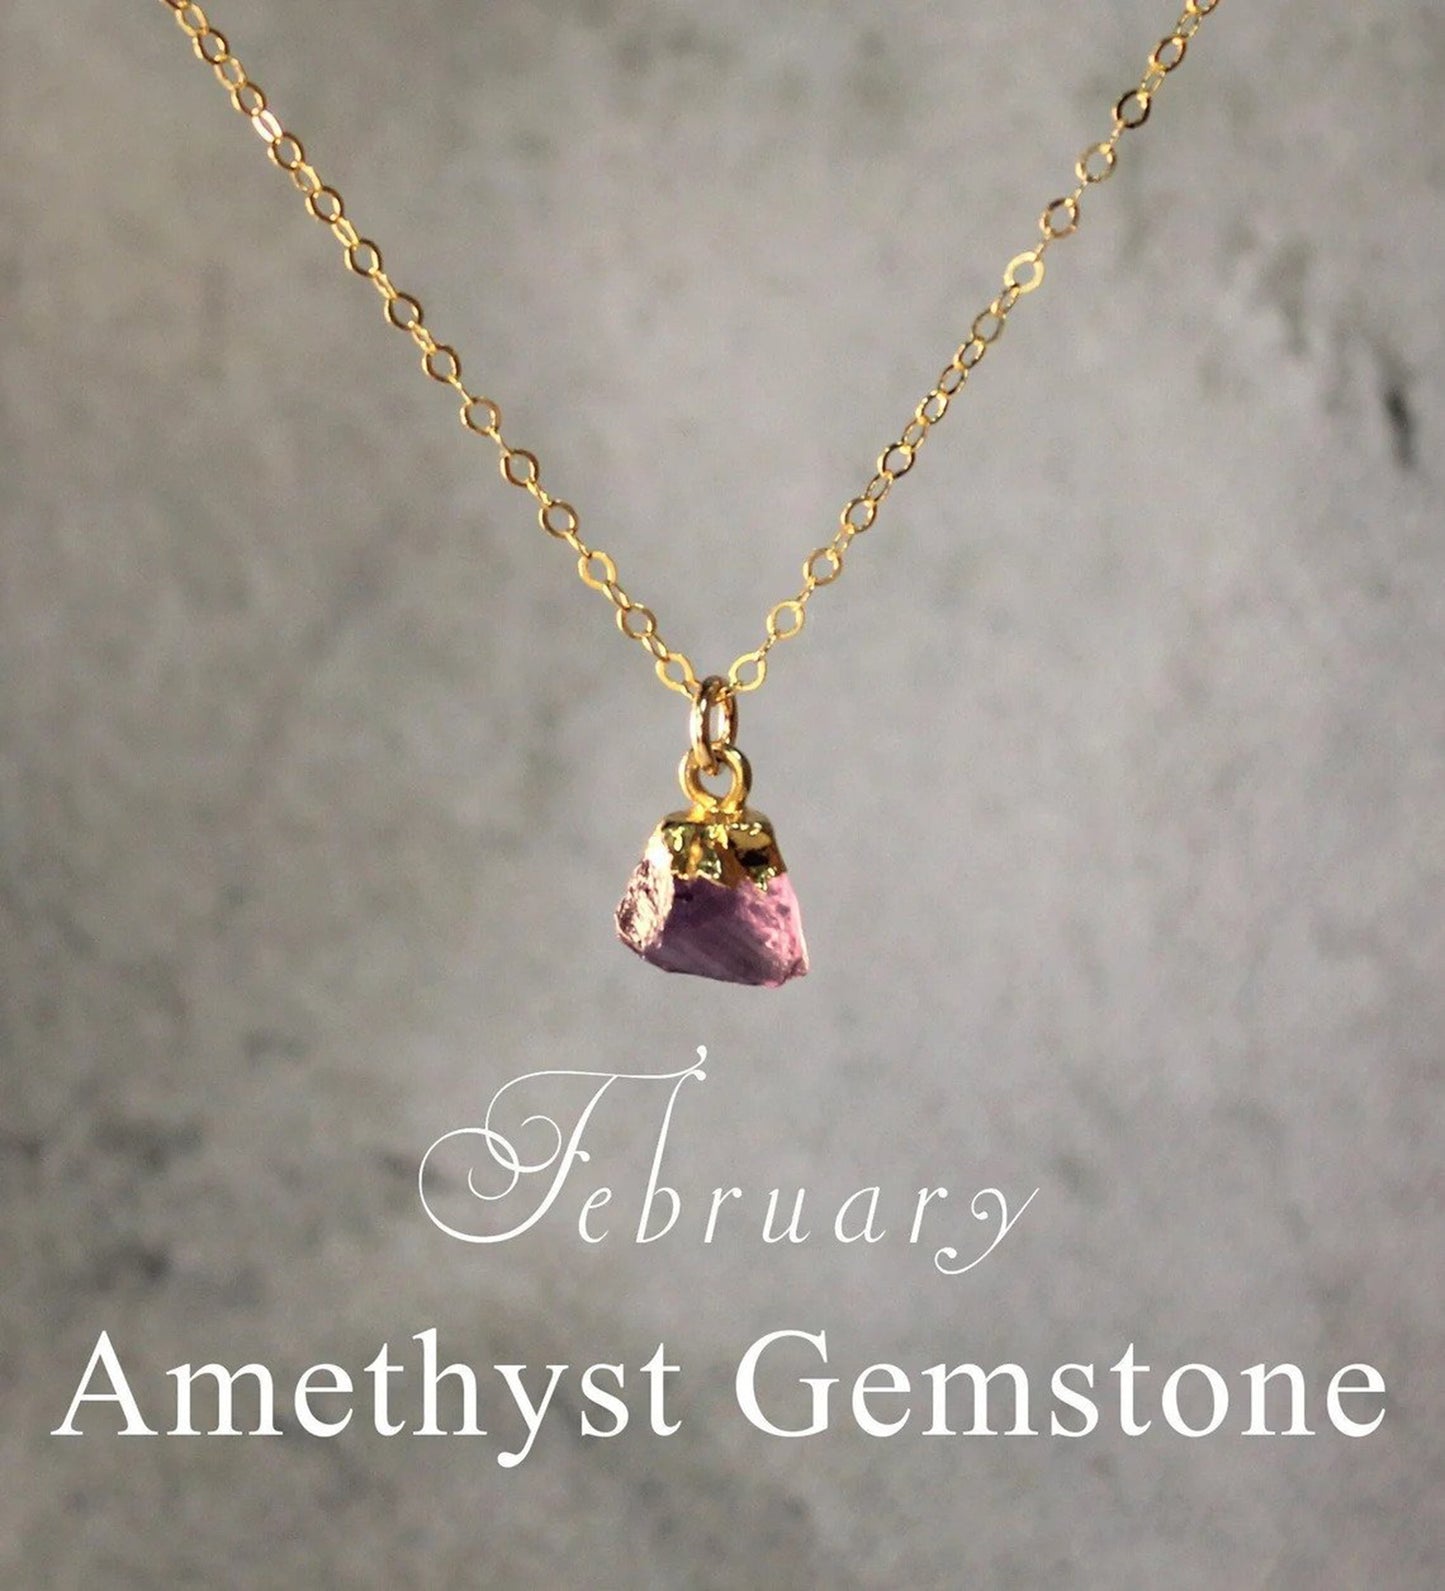 Natural amethyst crystal with an electroplated gold top creates a gemstone pendant that hangs from a gold filled necklace chain displayed against a blurry gray background.